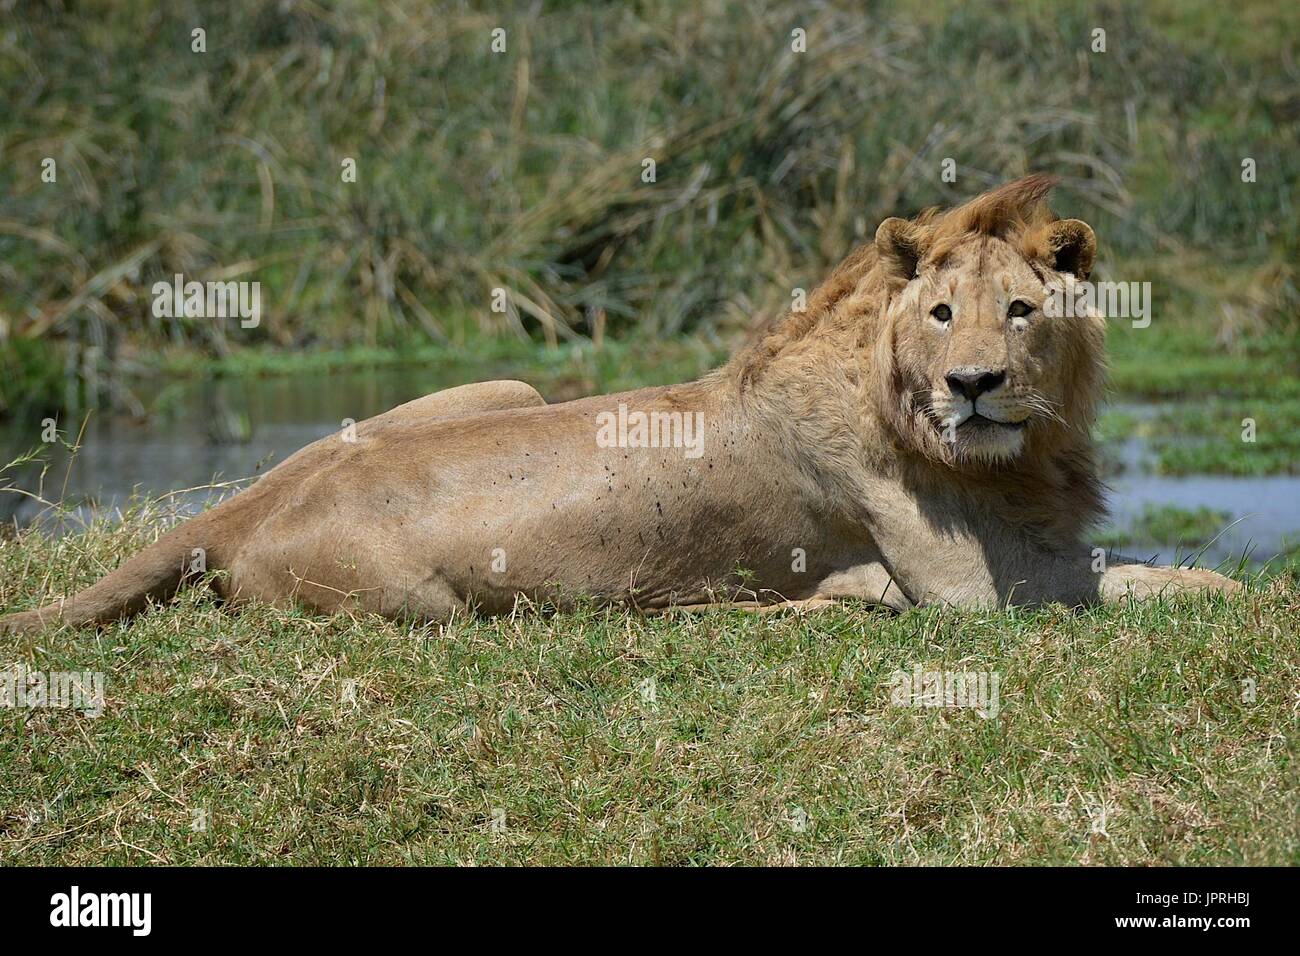 Lions are king of the savanna in the Serengeti National Park of Tanzania, Africa. Stock Photo